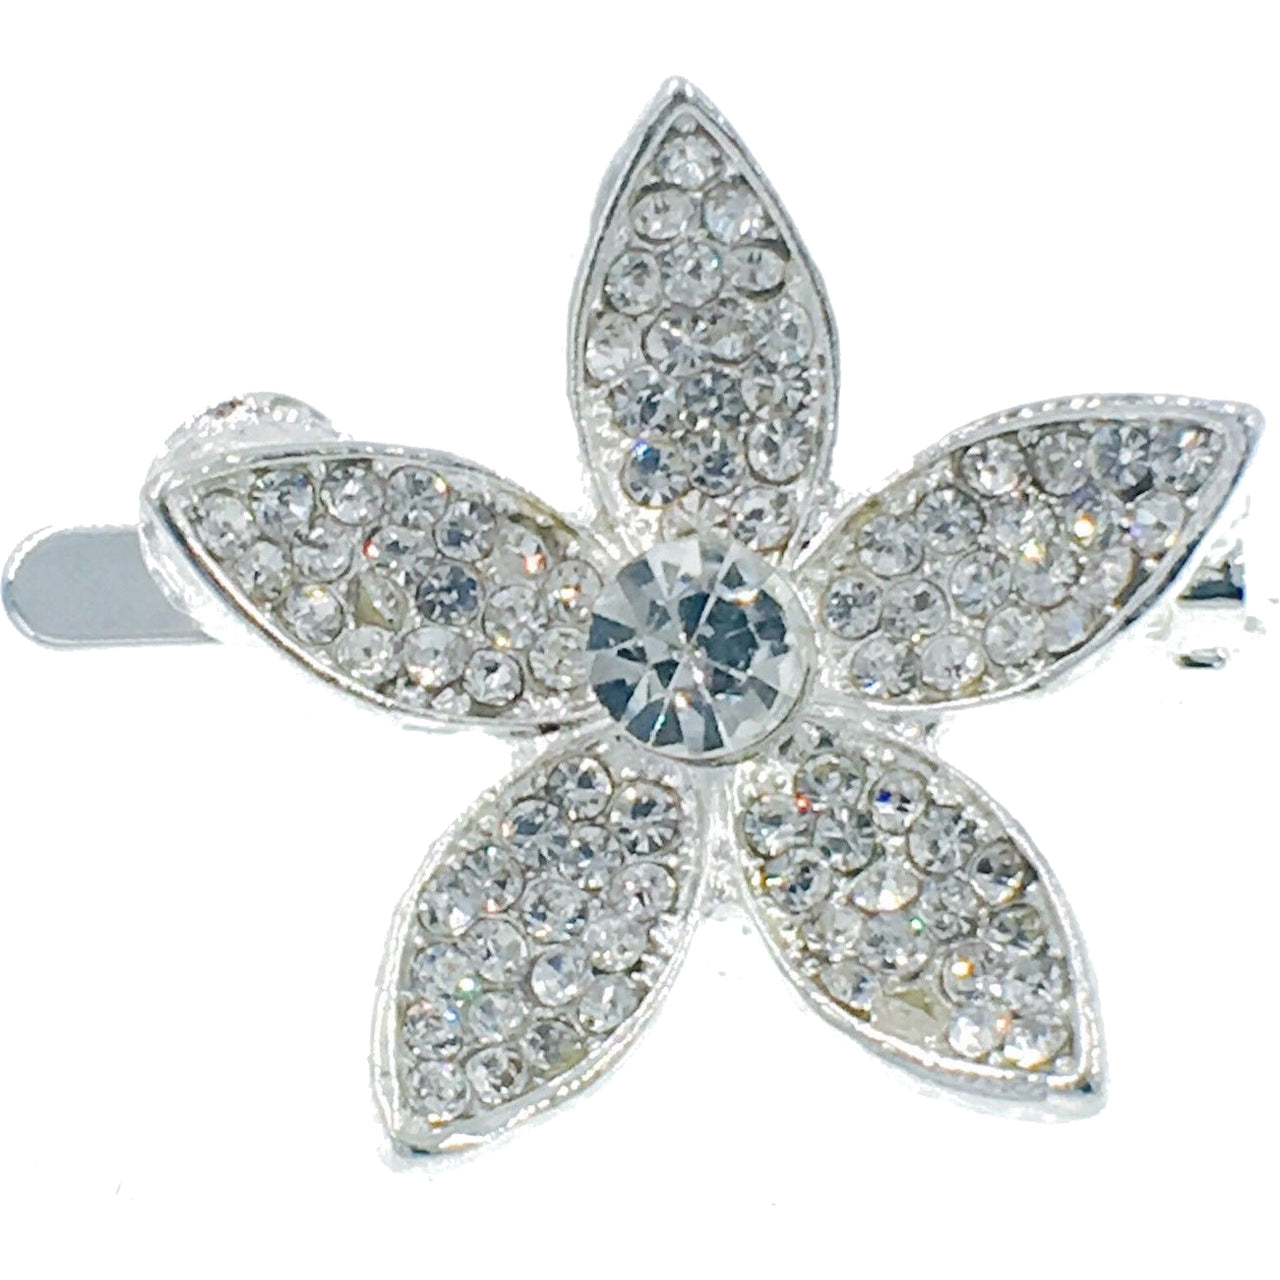 Redbud Flower Magnetic Hair Clip use Rhinestone Crystal silver base Clear AB, Magnetic Clip - MOGHANT